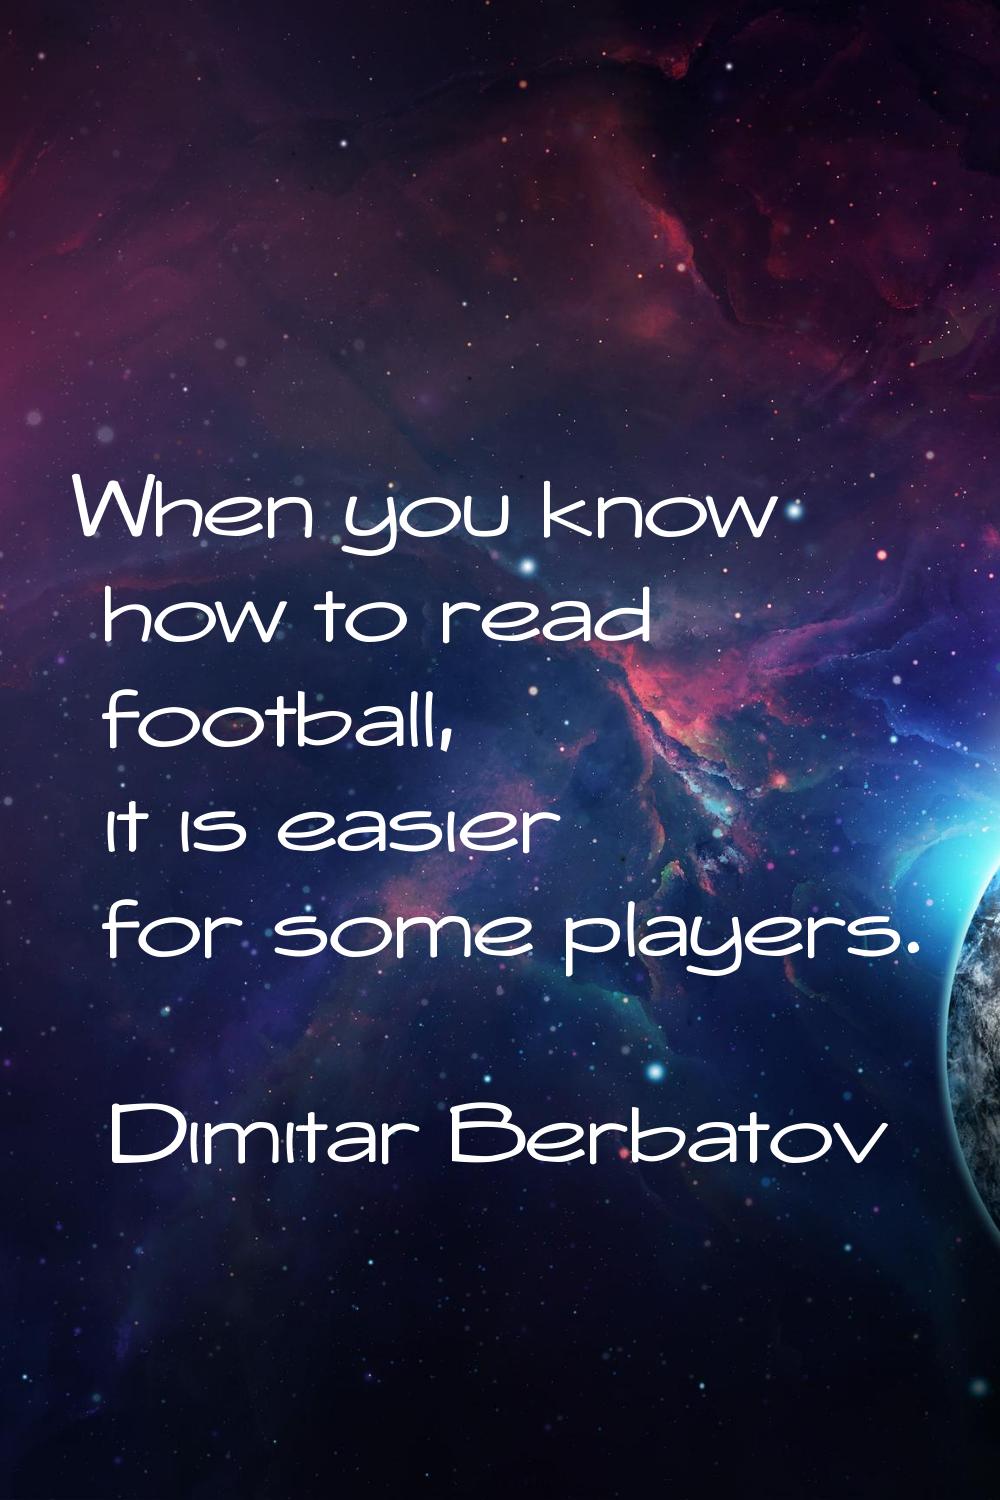 When you know how to read football, it is easier for some players.